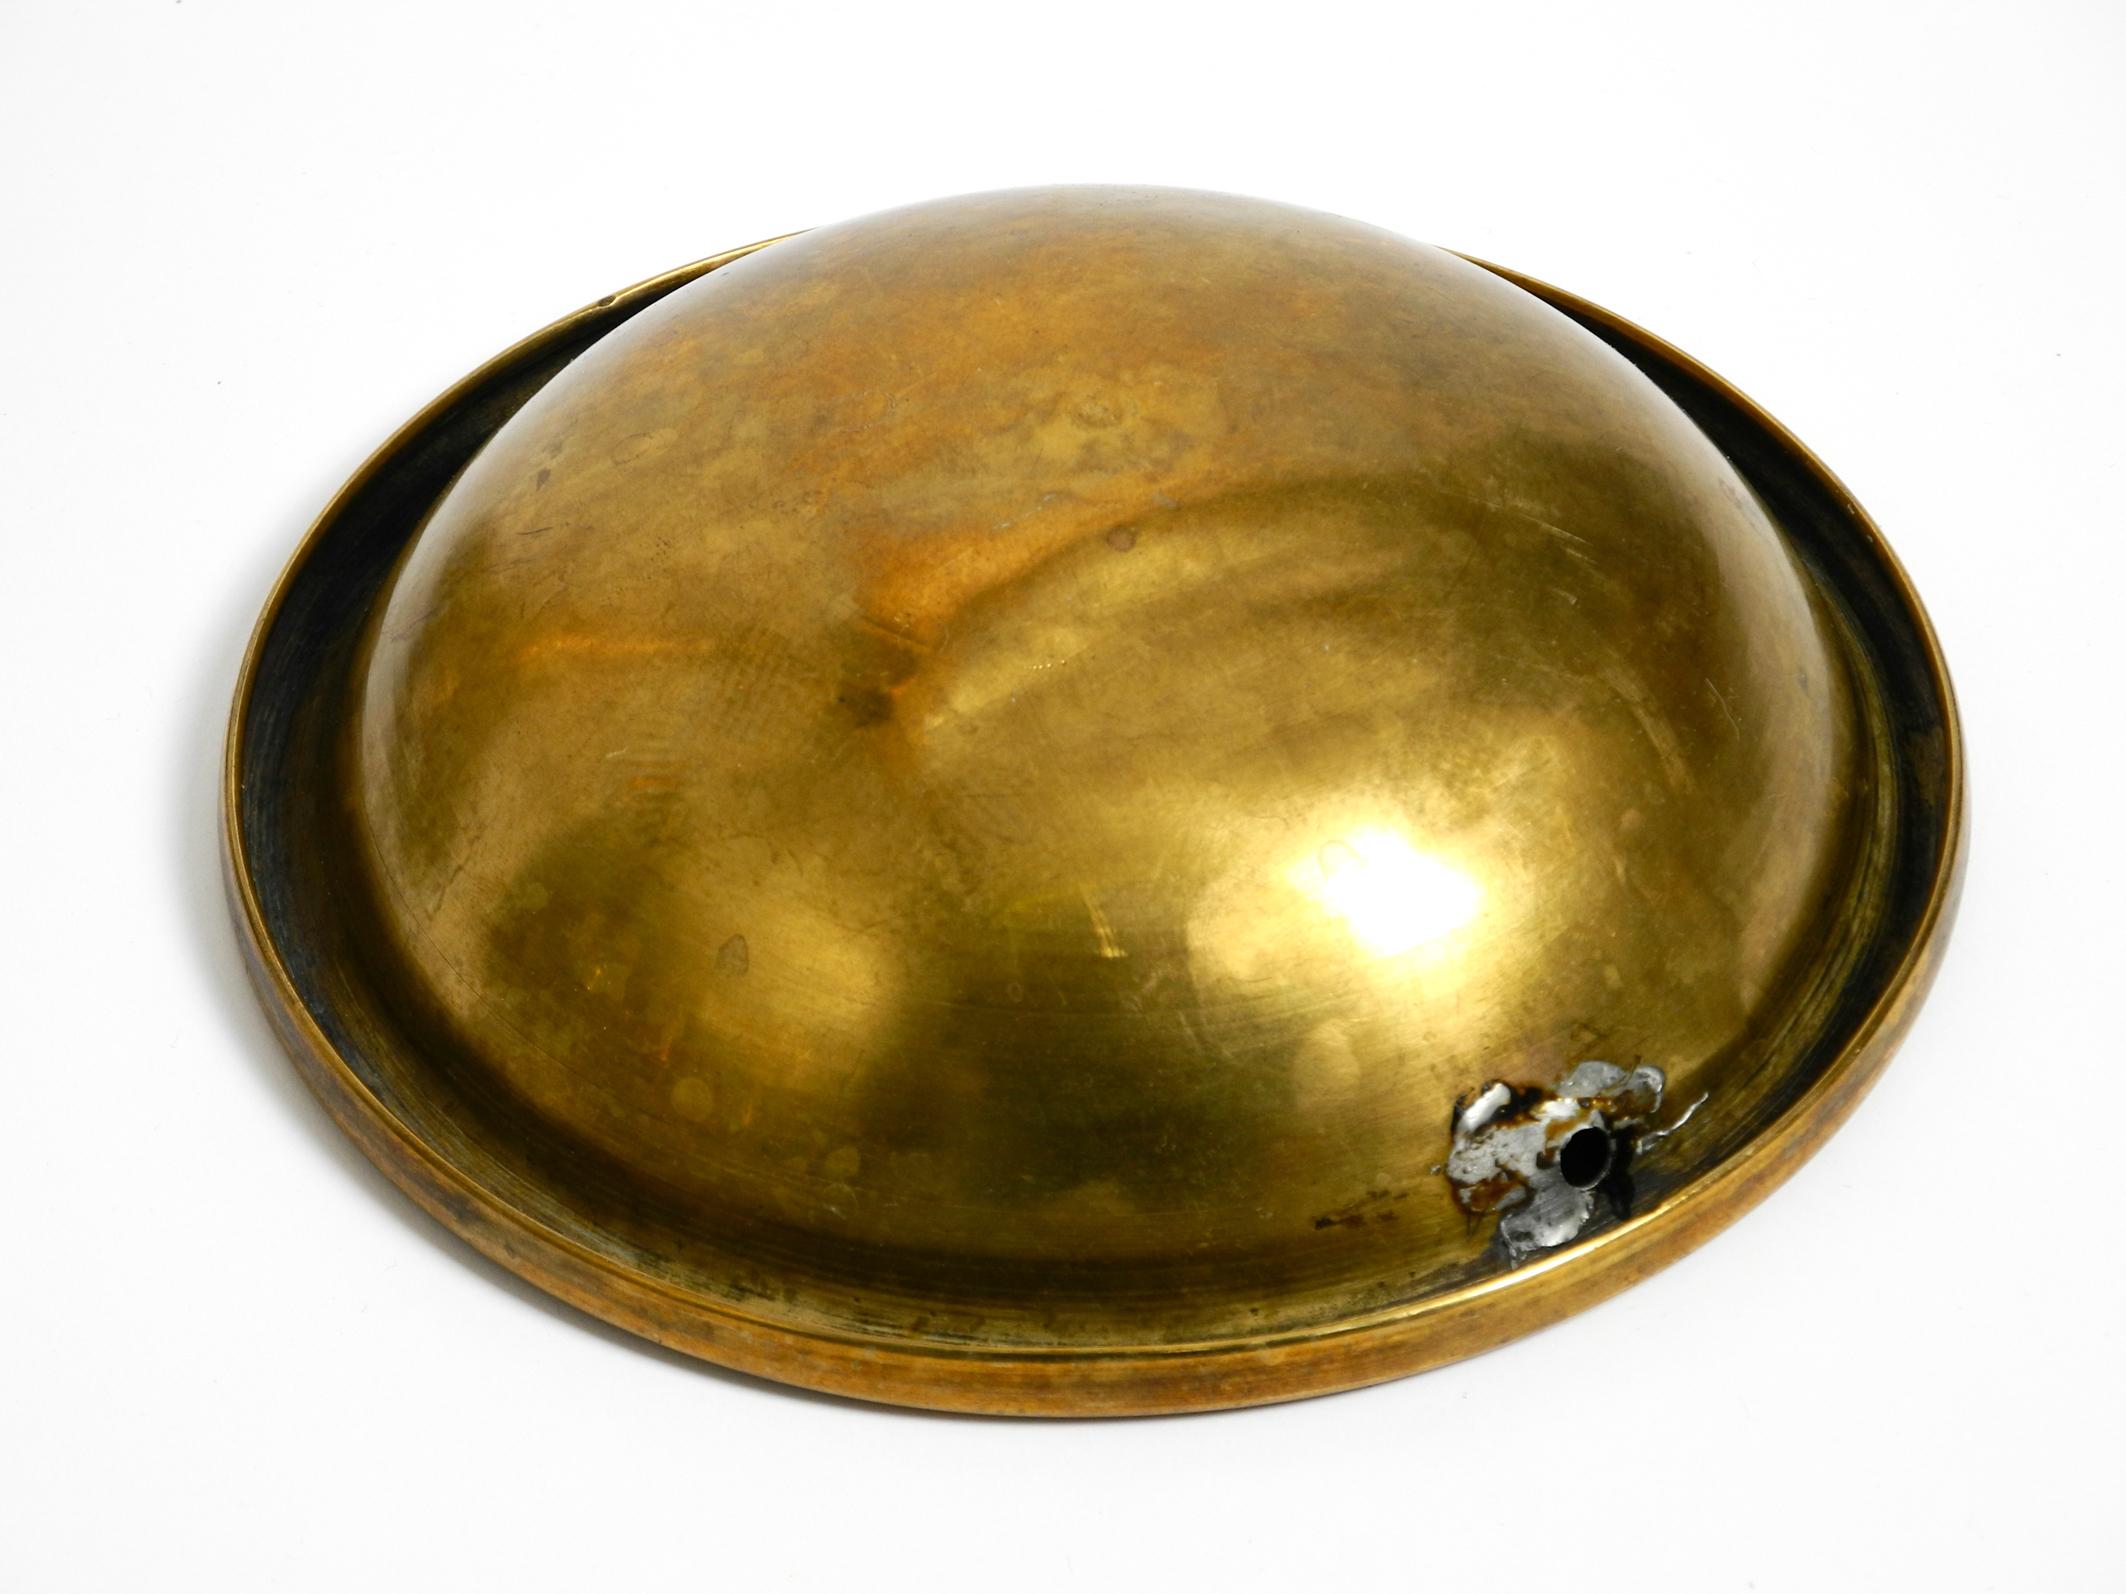 Early 20th Century Beautiful, Large, Heavy Art Nouveau Brass Standing Ashtray from Around 1900